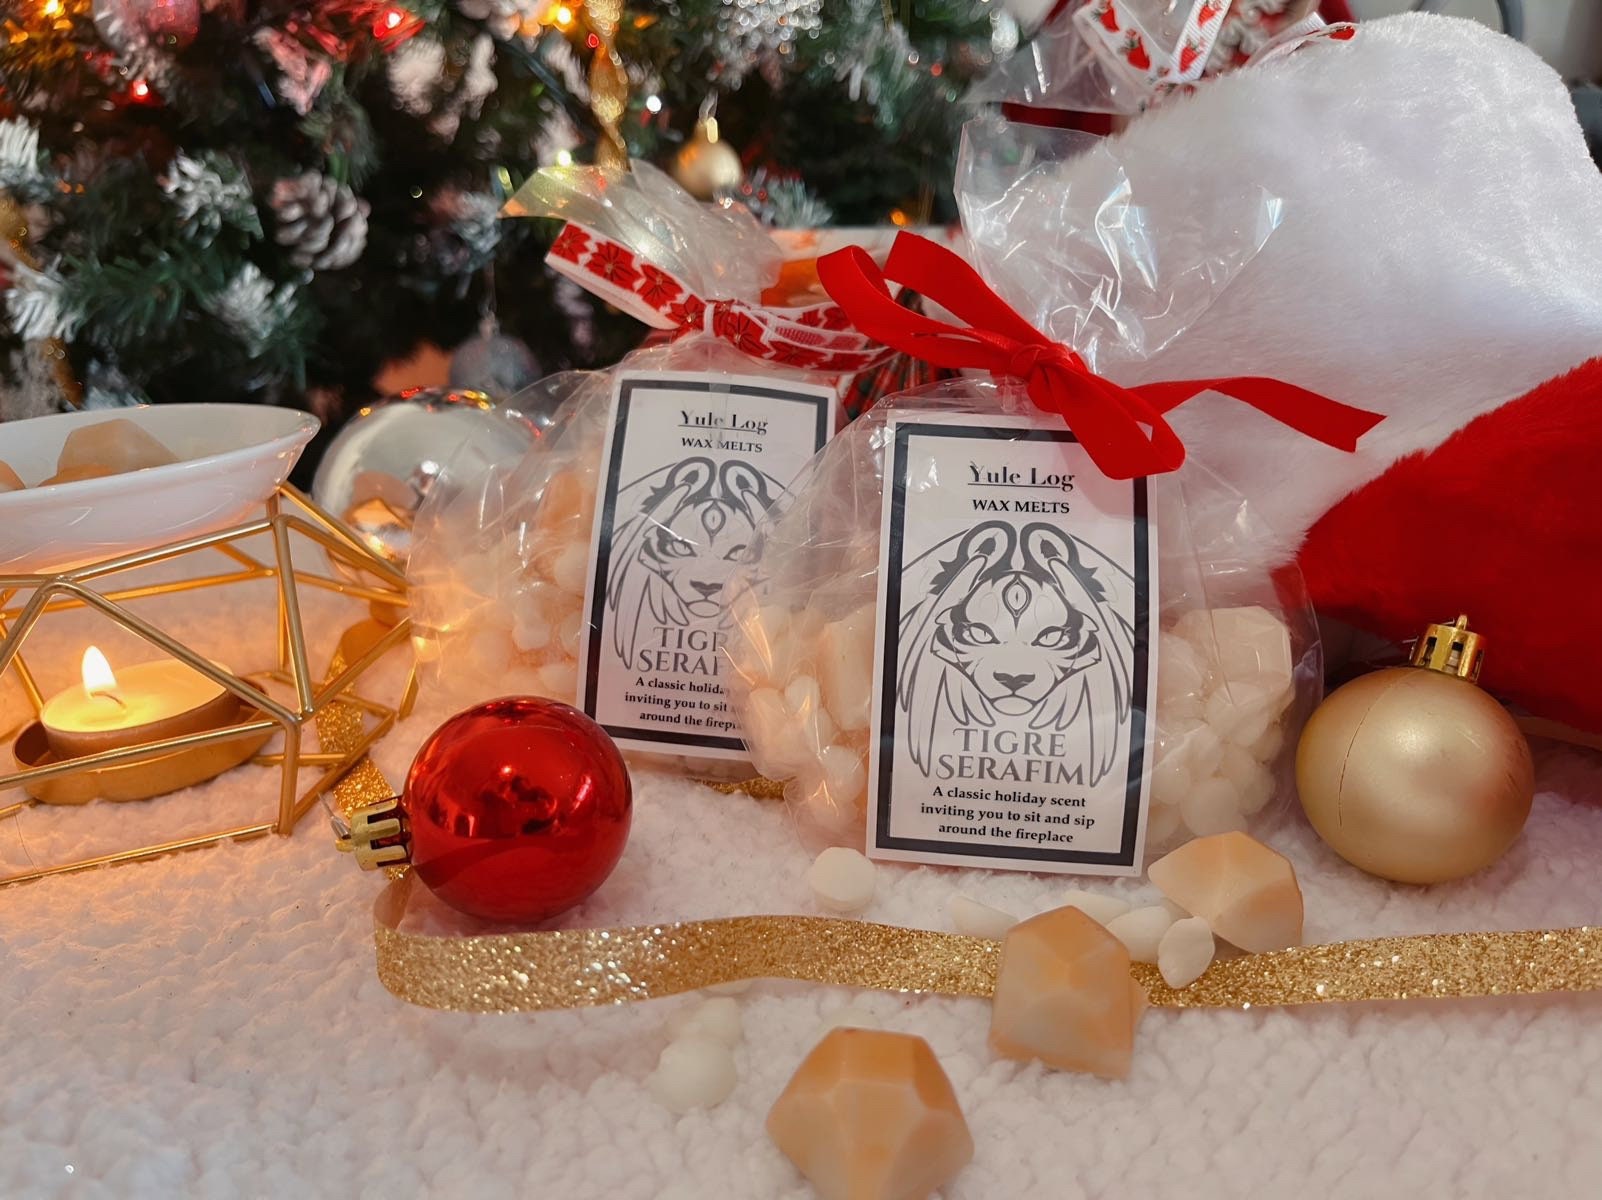 The Spirit of Yule™ Ritual Wax Melts, Witchy Christmas, Herbal Wax Melts, Christmas Wax Melts